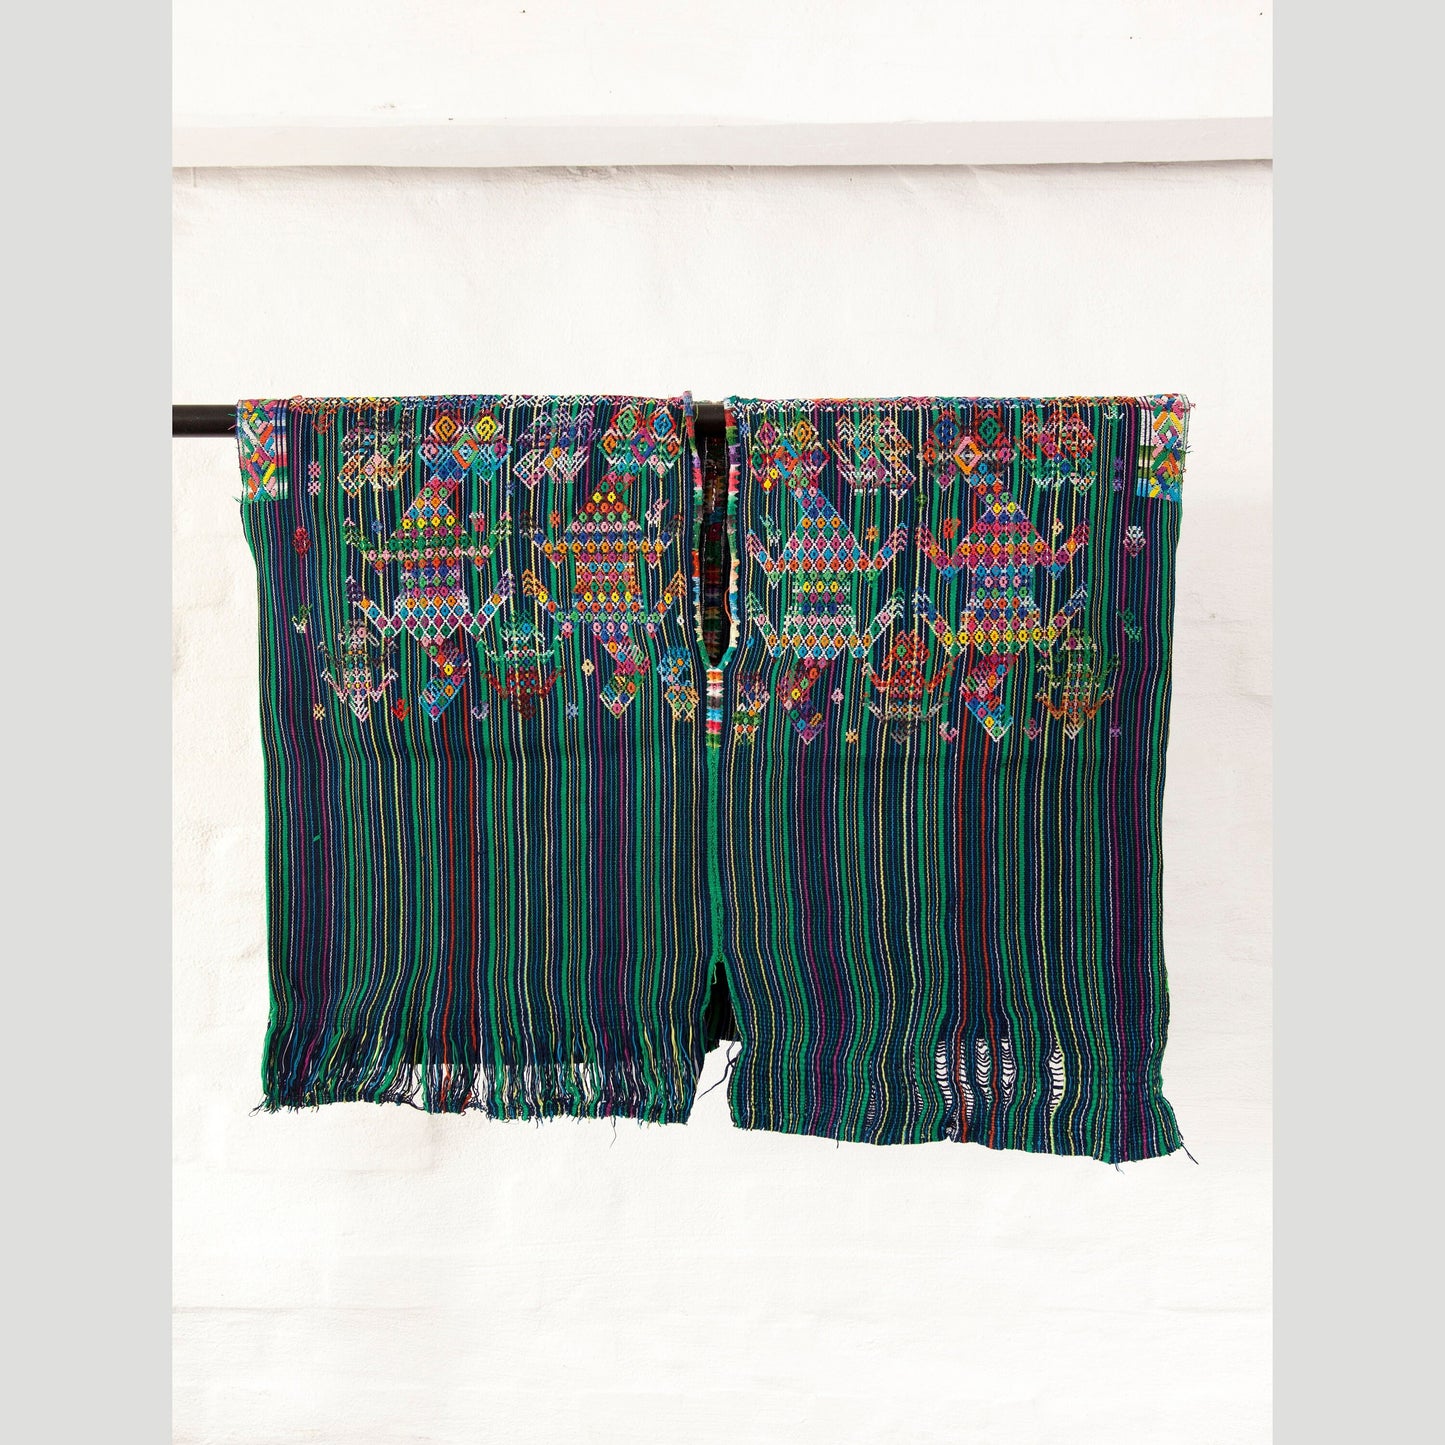 Rare fabric, black/colorful, 100x120cm unique from Guatemala, handwoven by Mayan women, sewing projects such as pillows, vests, bags, accessories